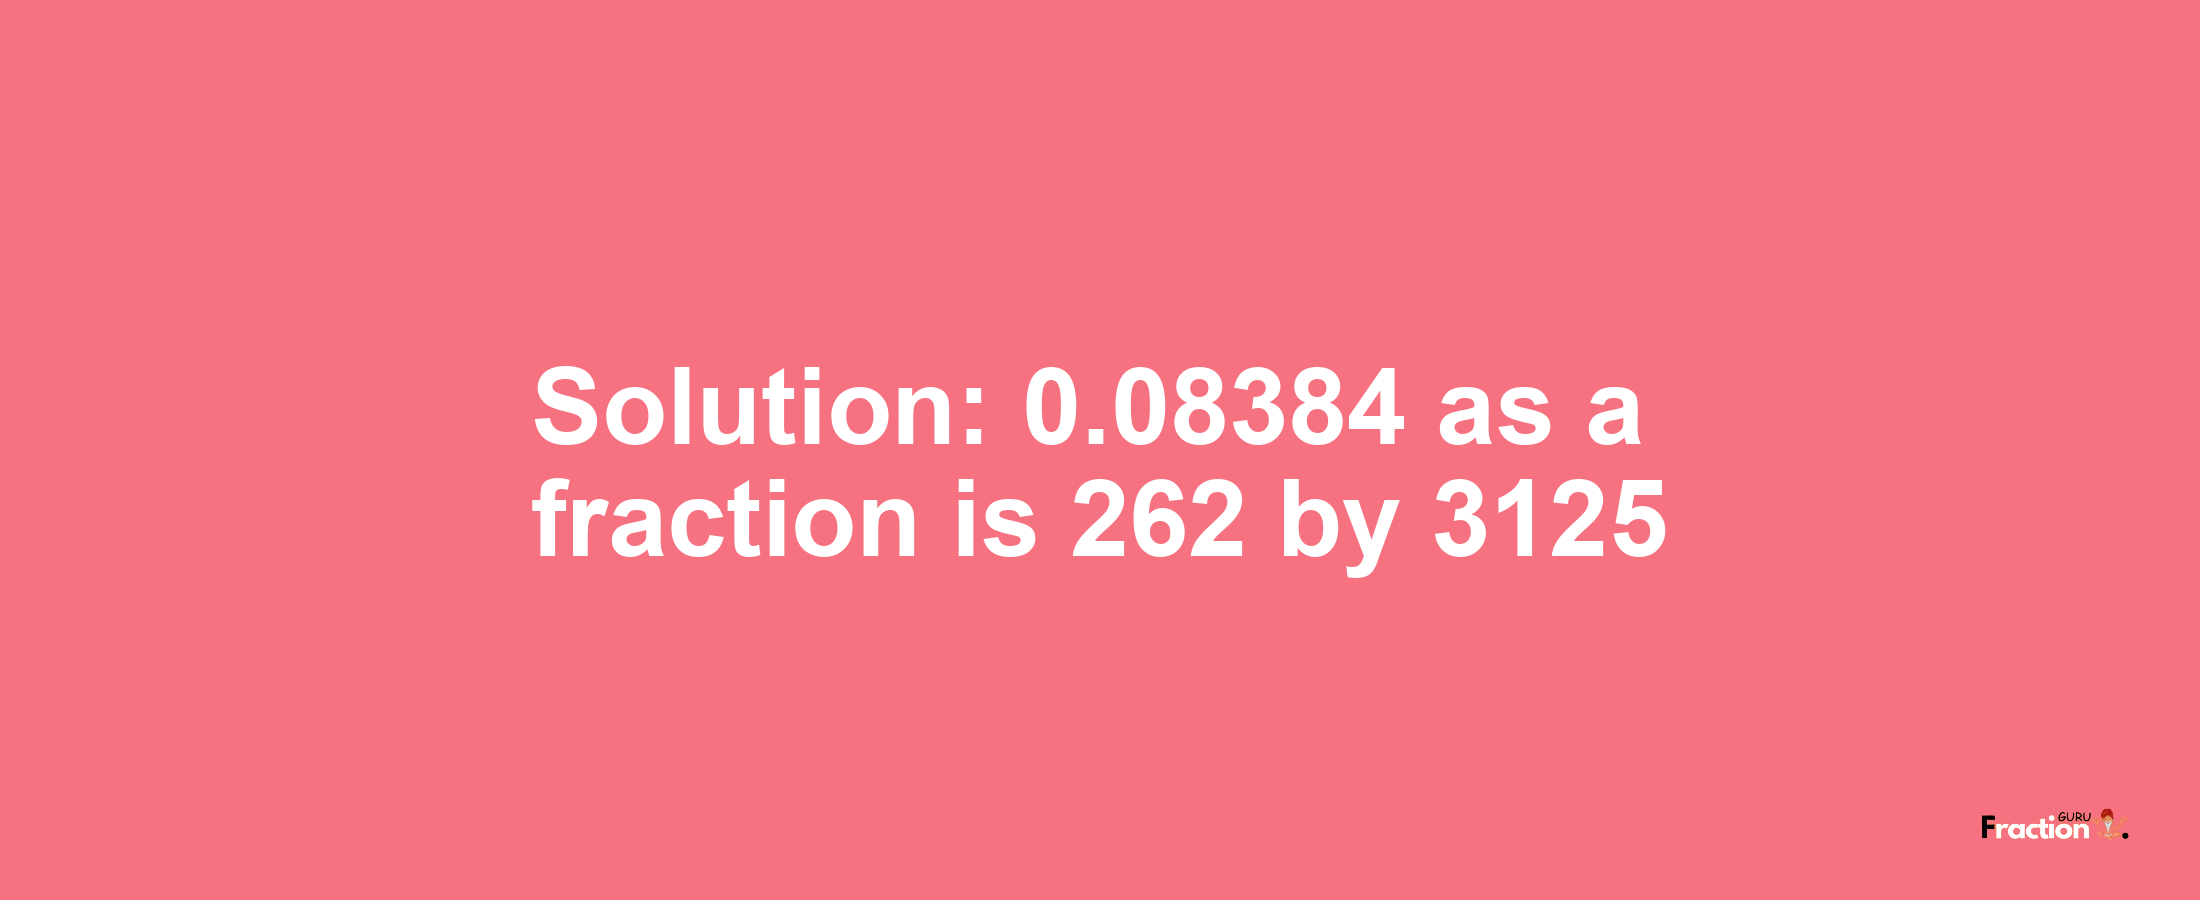 Solution:0.08384 as a fraction is 262/3125